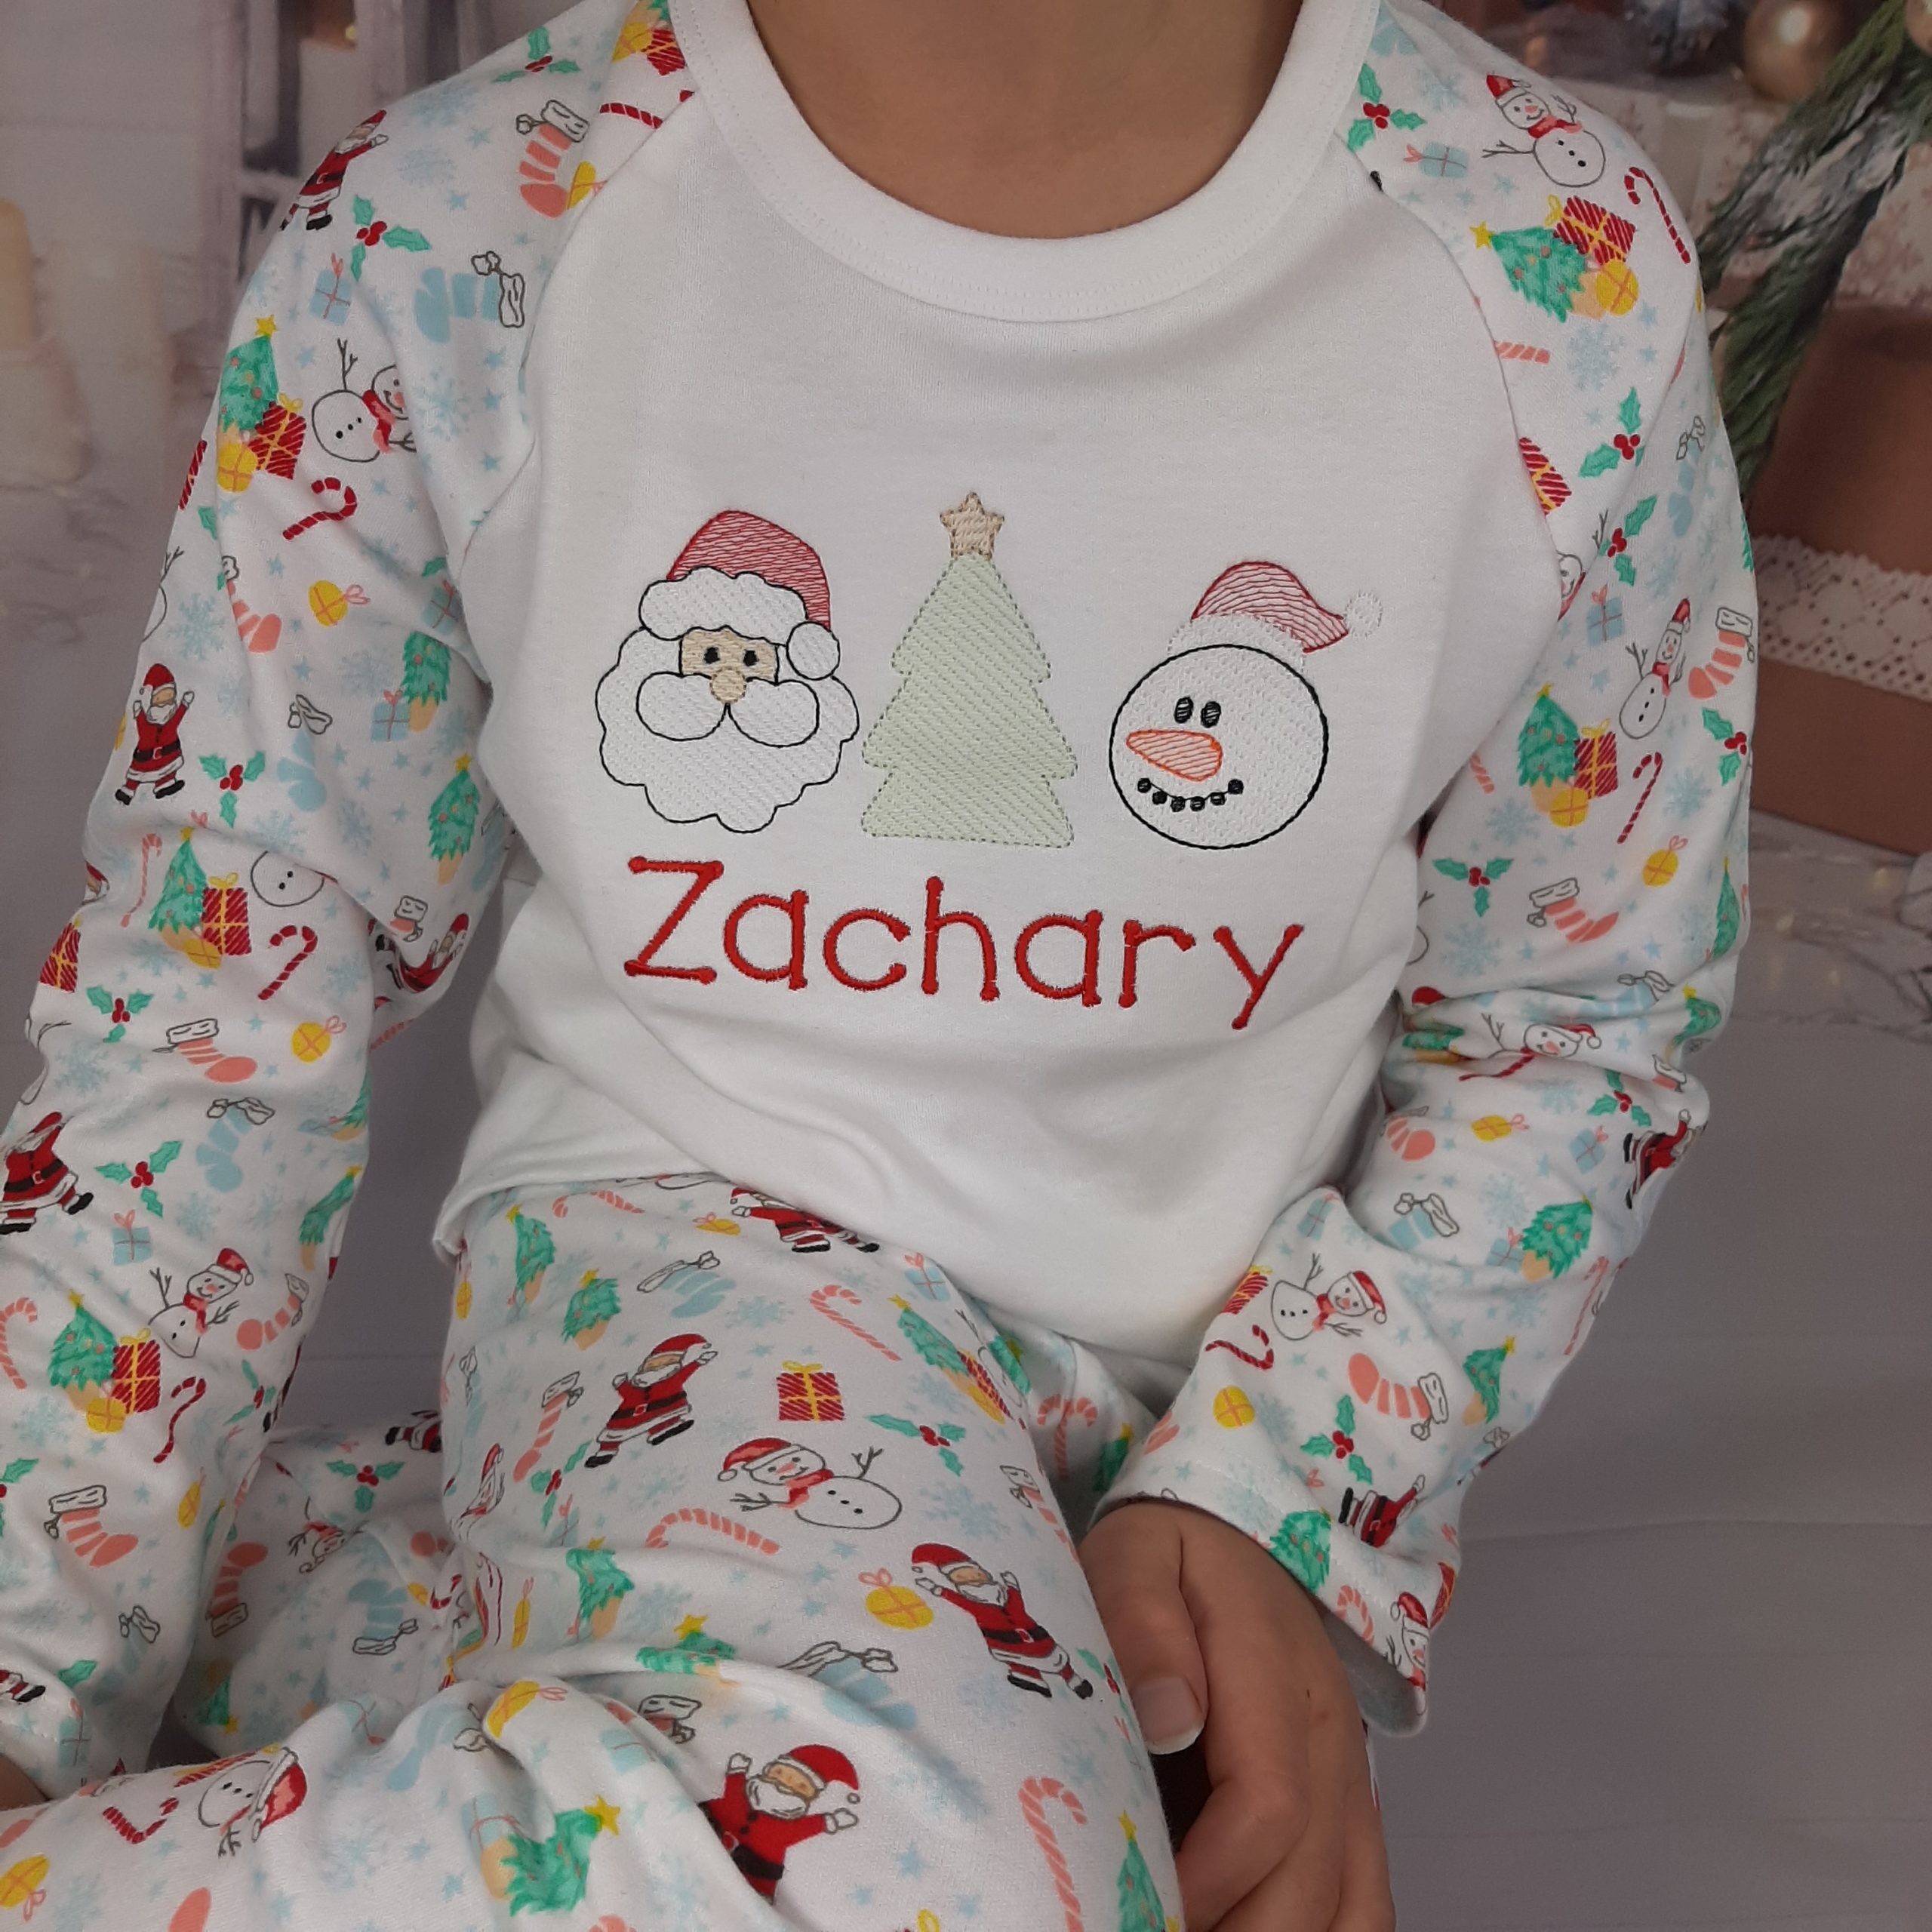 Winter Wonderland Christmas Pyjamas for Kids - Personalised with embroidery, great bargain cheap first christmas pyamas. close up of the embroidery name